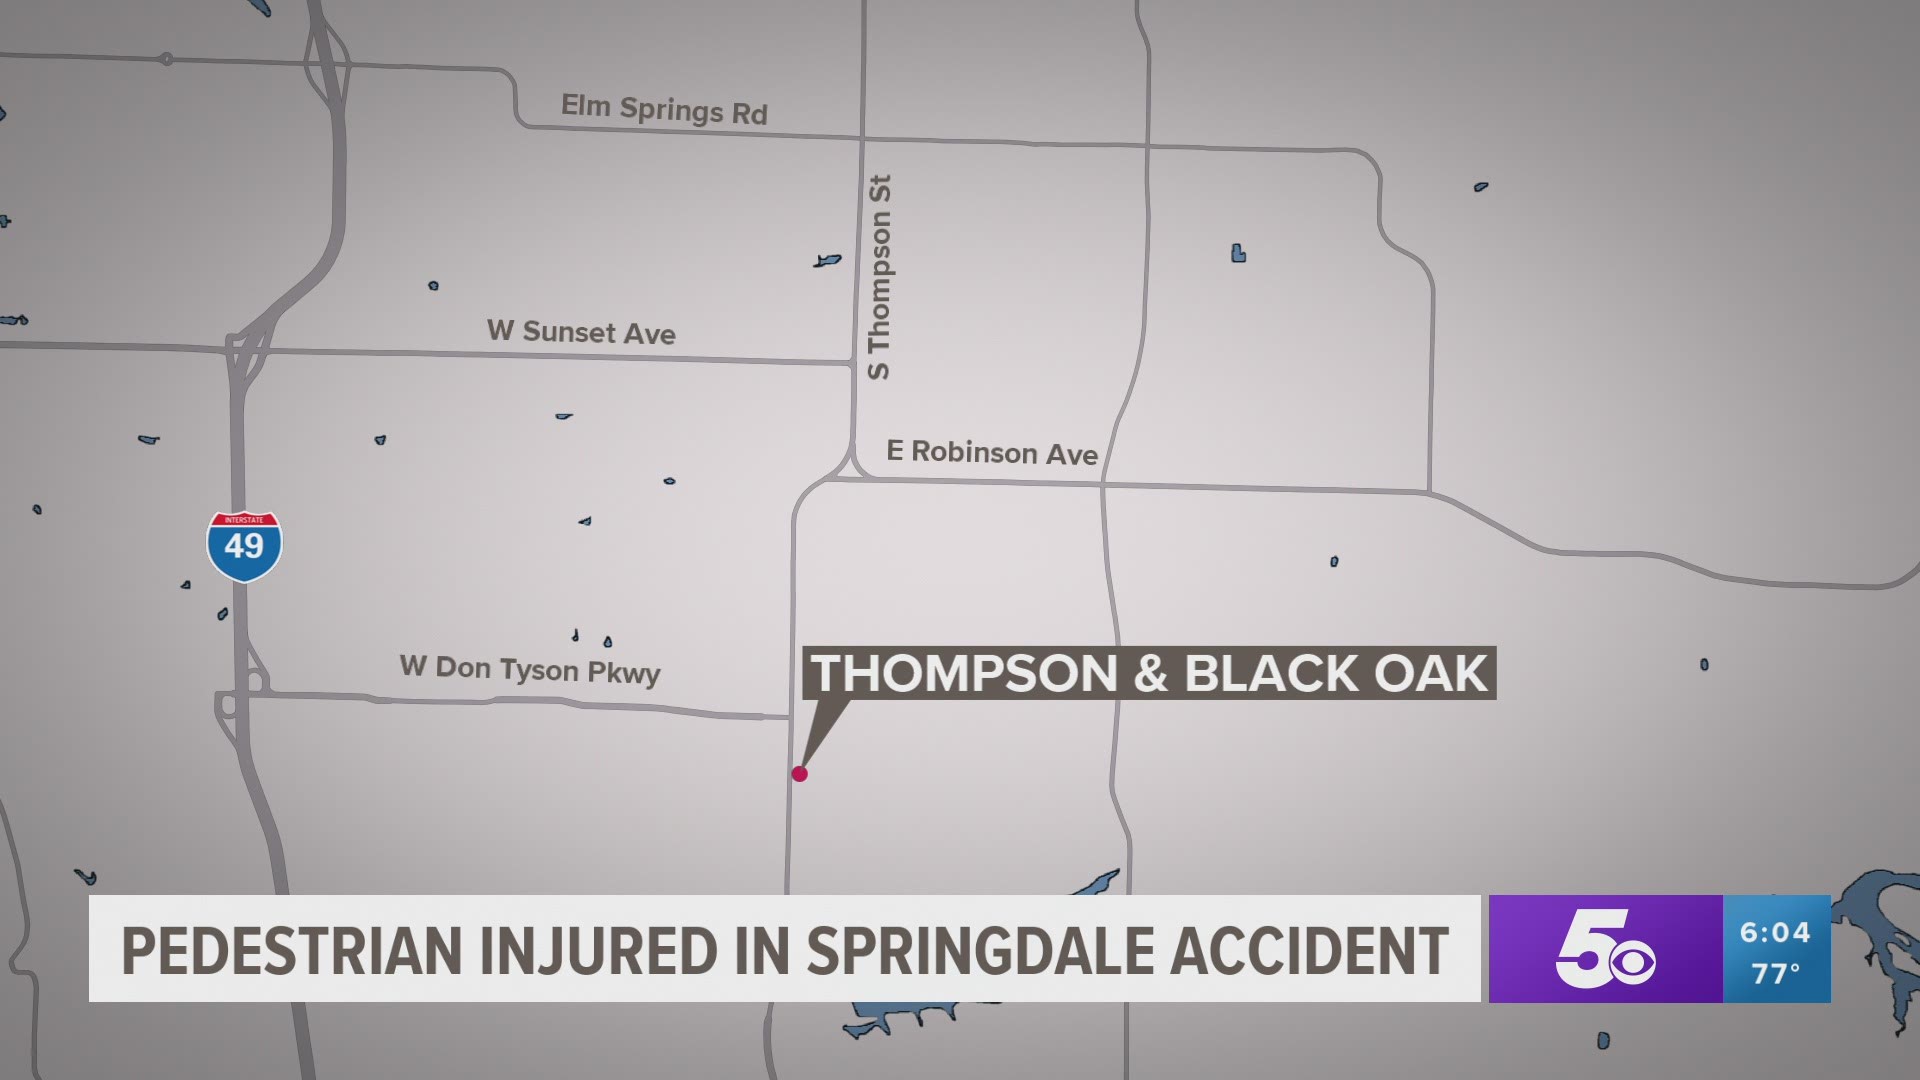 Officers responded to Thompson and Black Oak Wednesday night after receiving a call about a pedestrian hit by a vehicle.